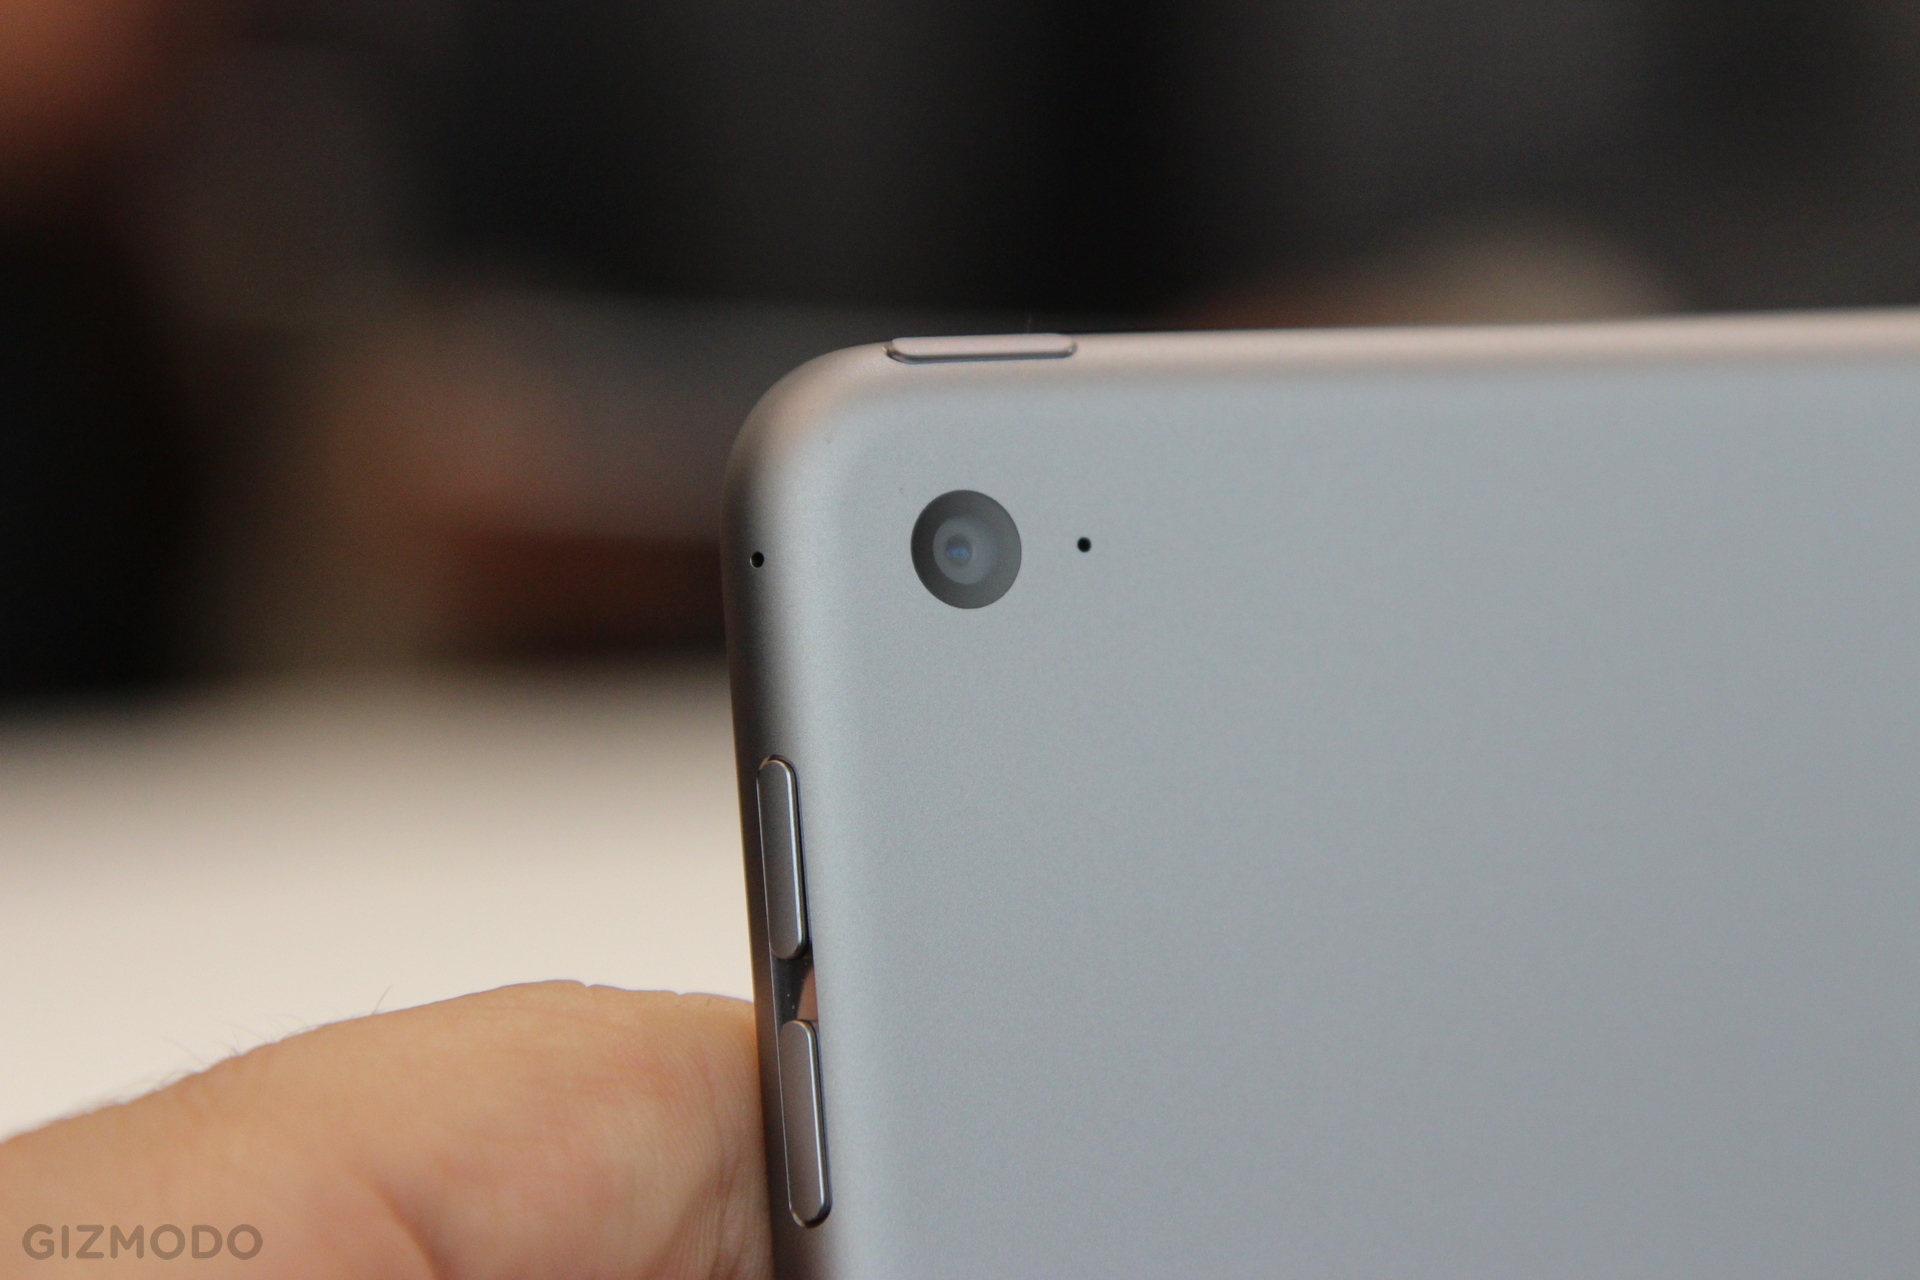 iPad Air 2 And iPad Mini 3 Hands-On: One Of These Tablets Feels Awesome